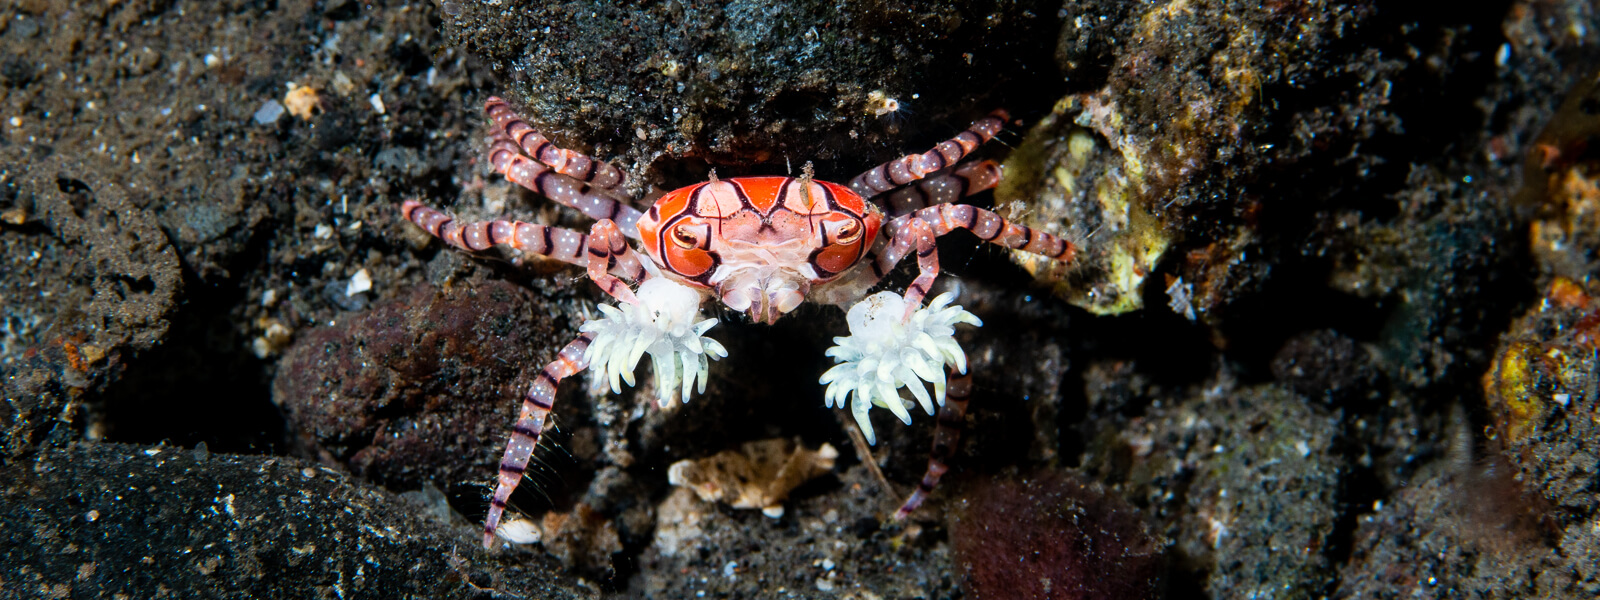 boxer crab are found in Lembeh